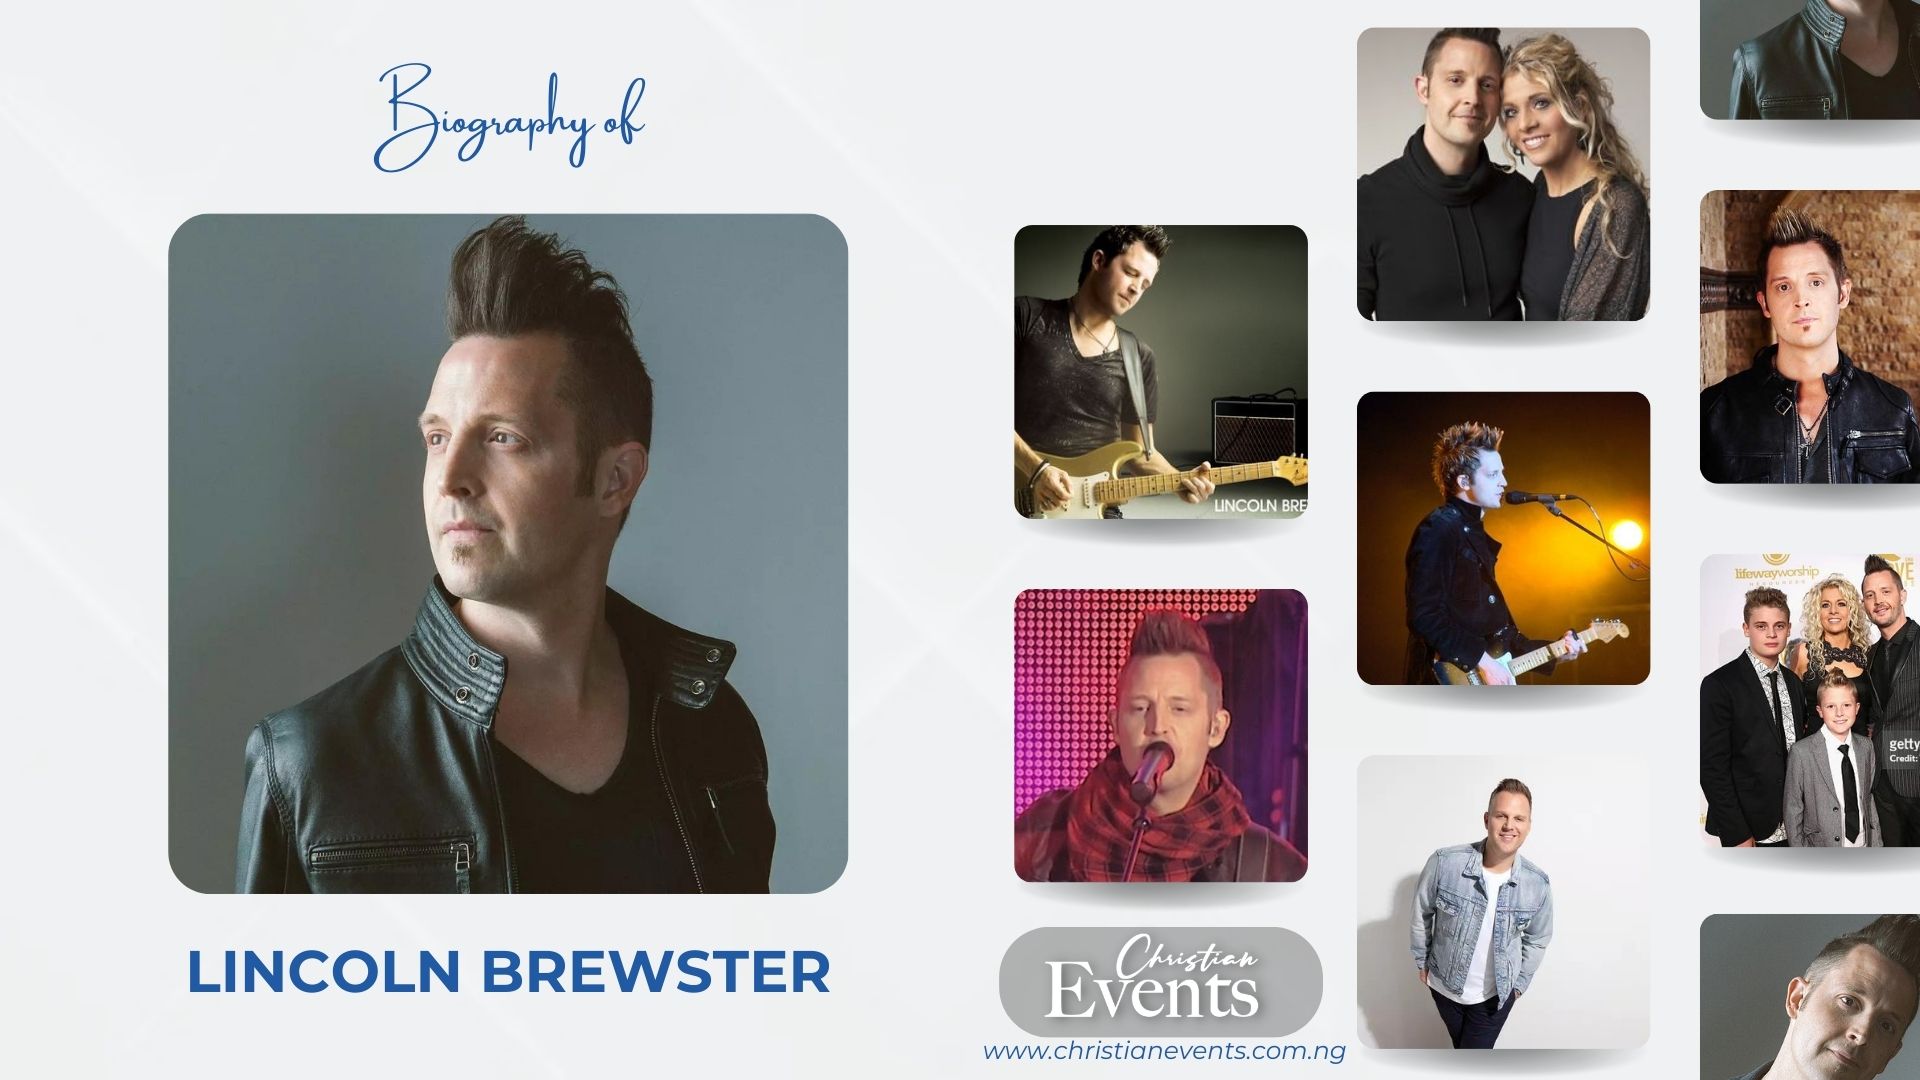 Biography of Lincoln Brewster's